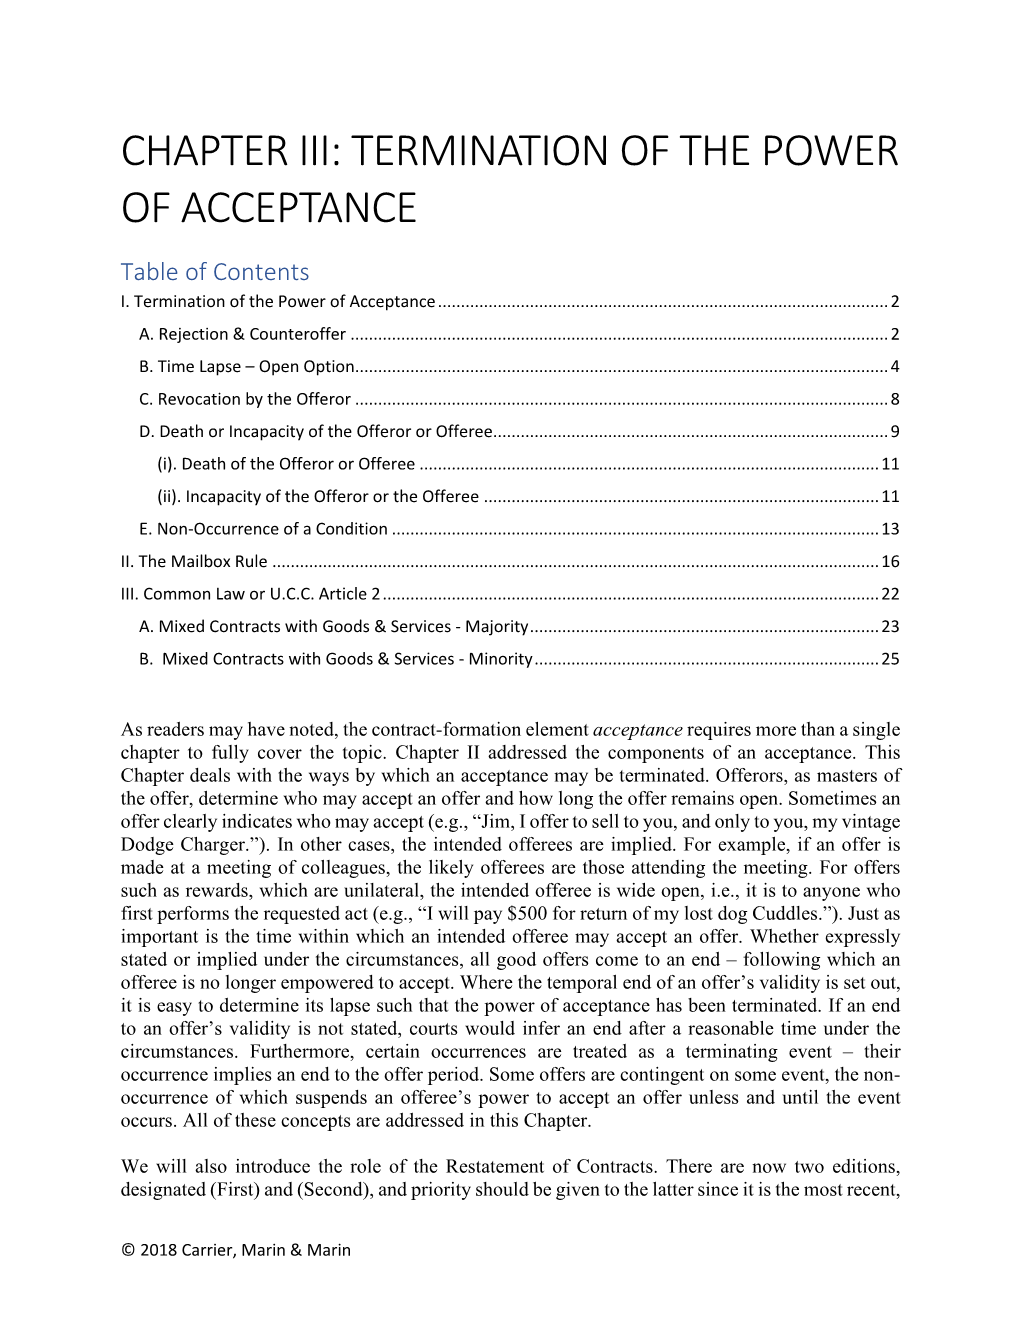 CHAPTER III: TERMINATION of the POWER of ACCEPTANCE Table of Contents I